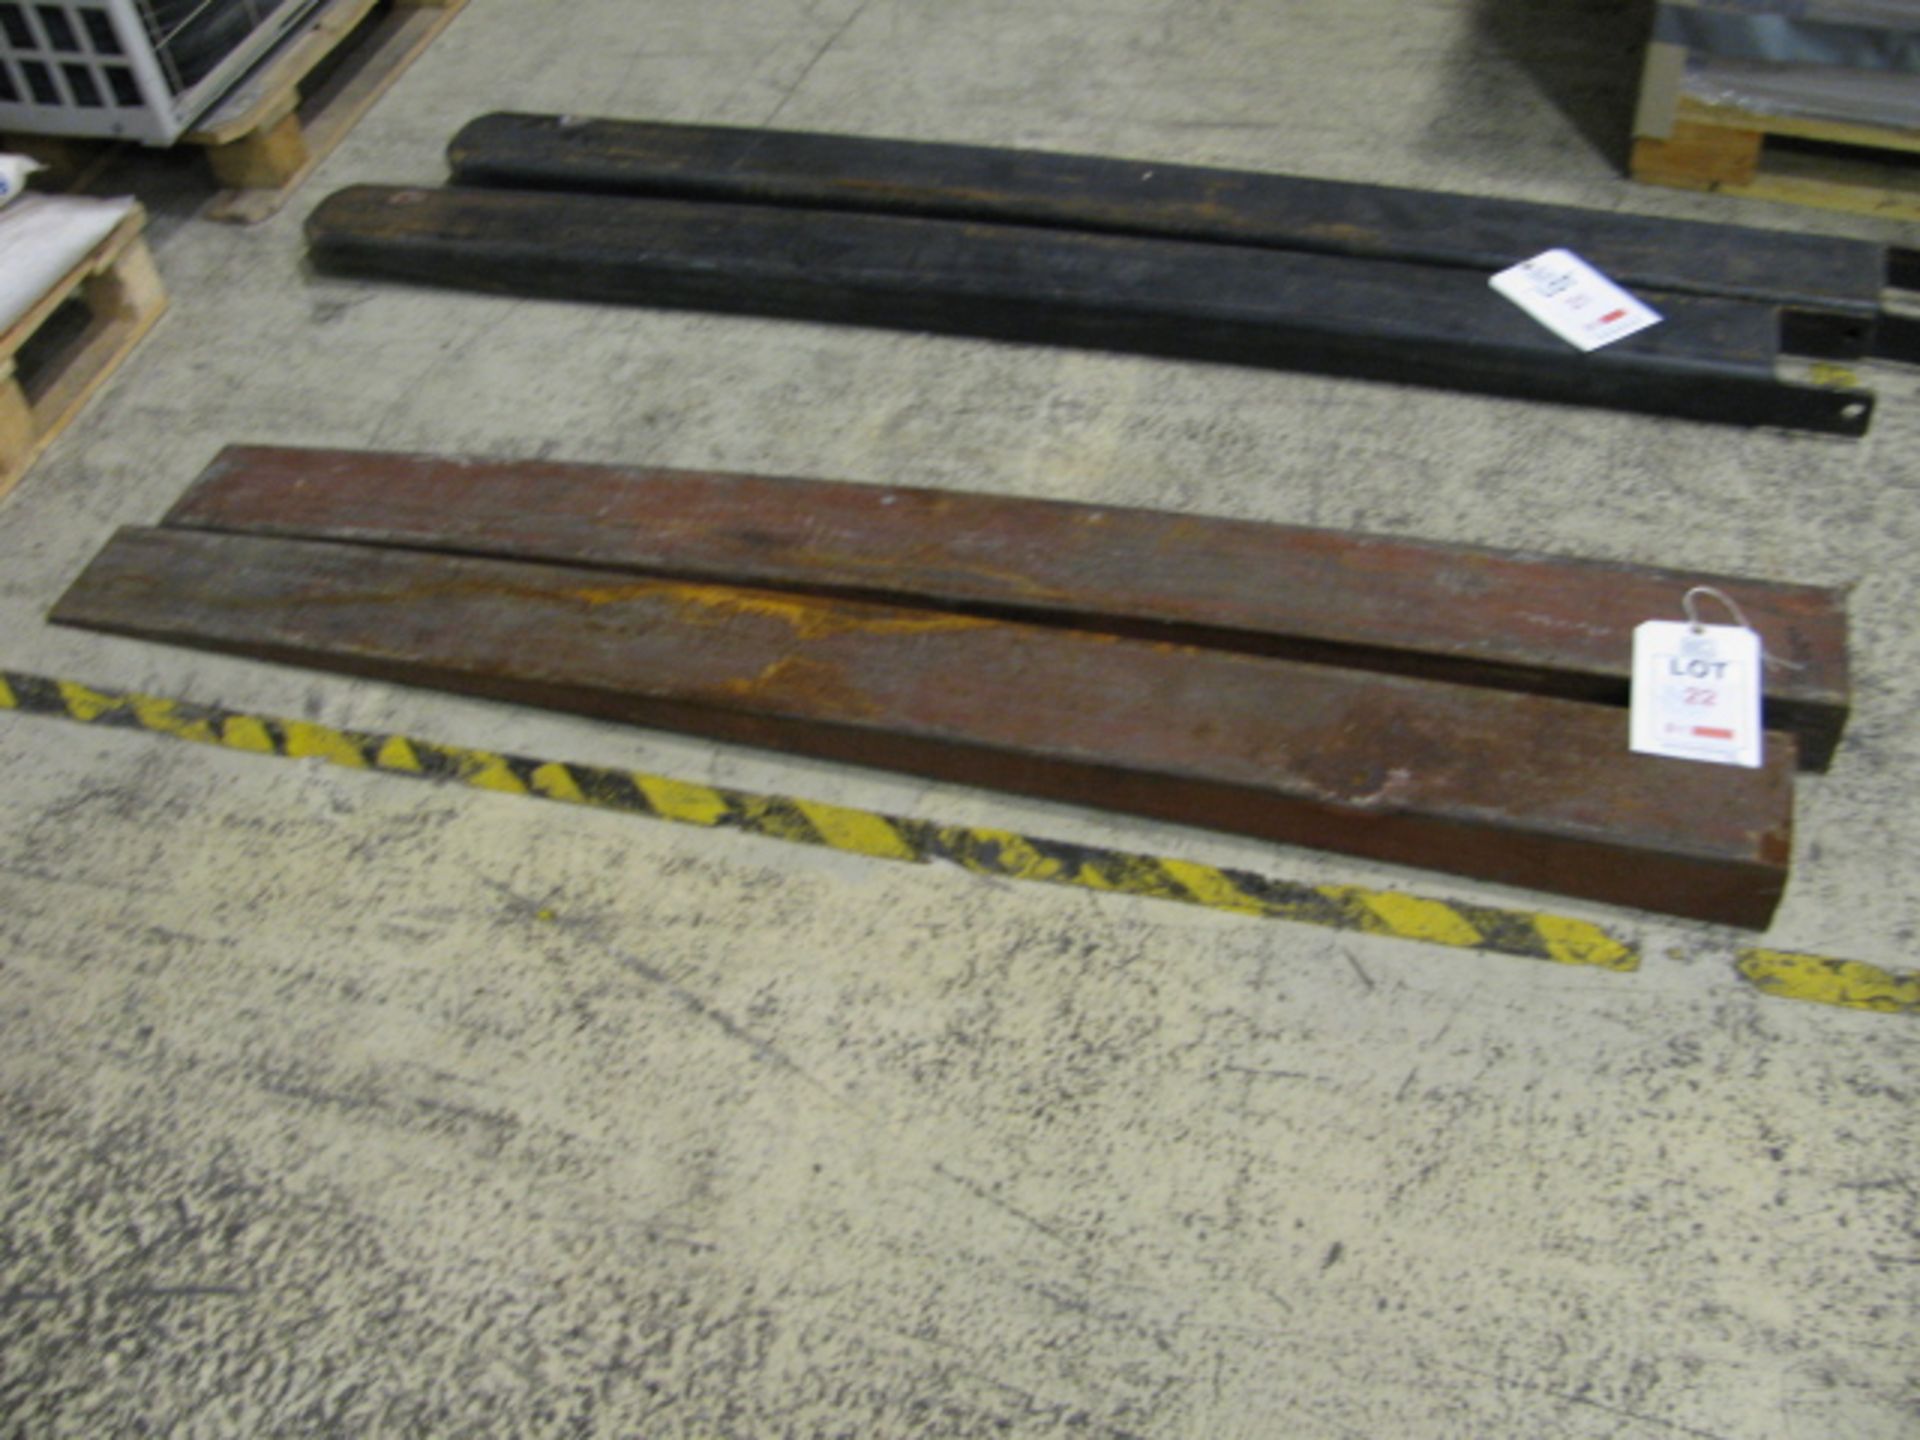 Pair of 2m fork extensions. NB. This item has no record of Thorough Examination. The purchaser